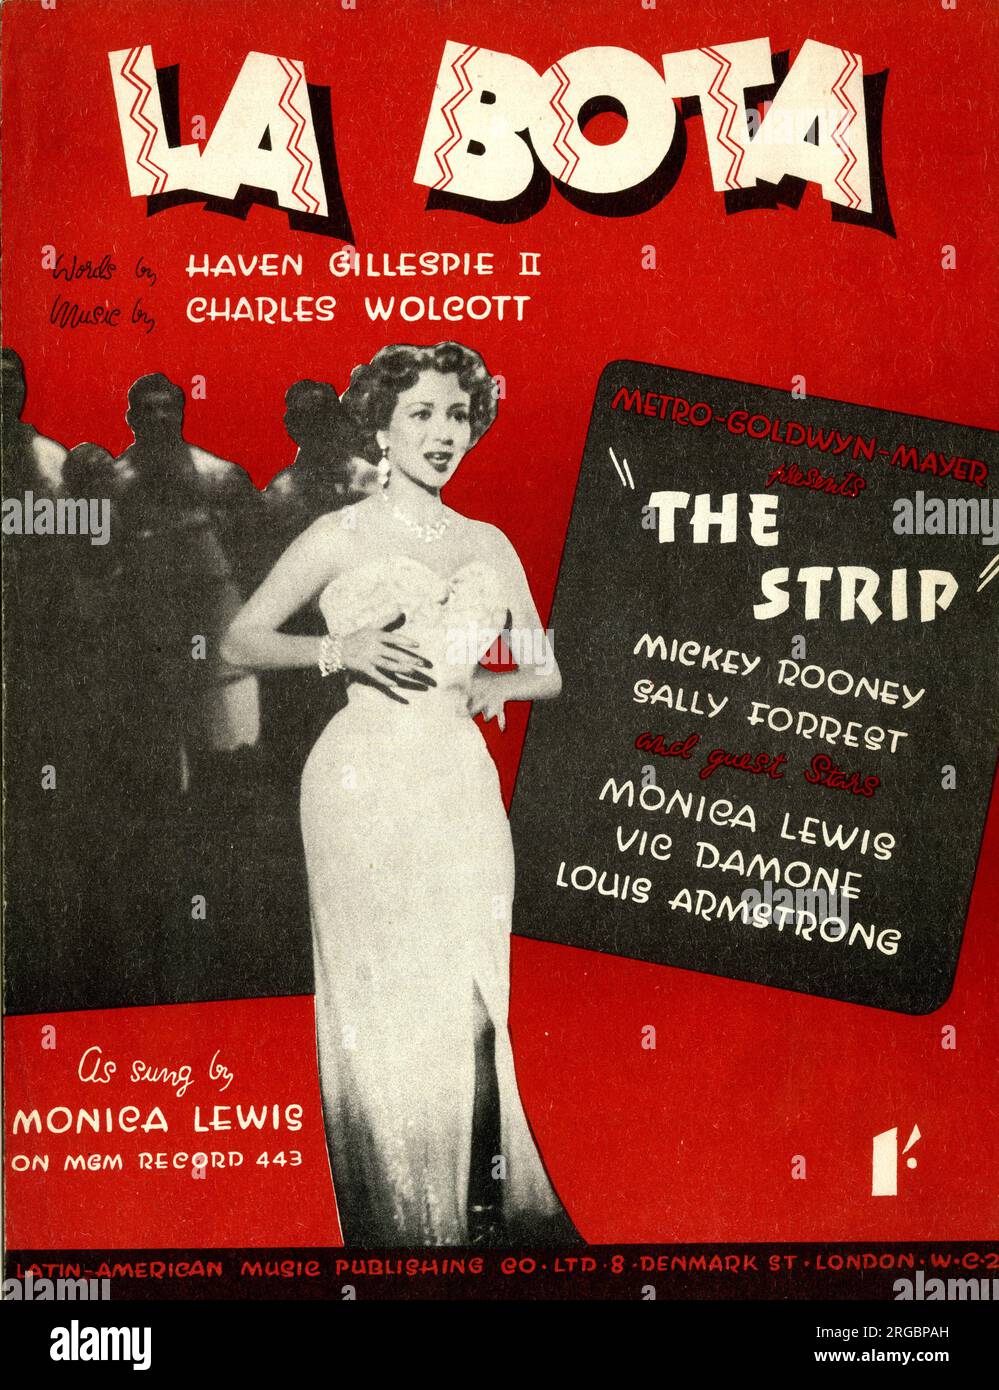 Music cover, La Bota, words by Haven Gillespie II,  music by Charles Wolcott, sung by Monica Lewis in MGM film The Strip Stock Photo